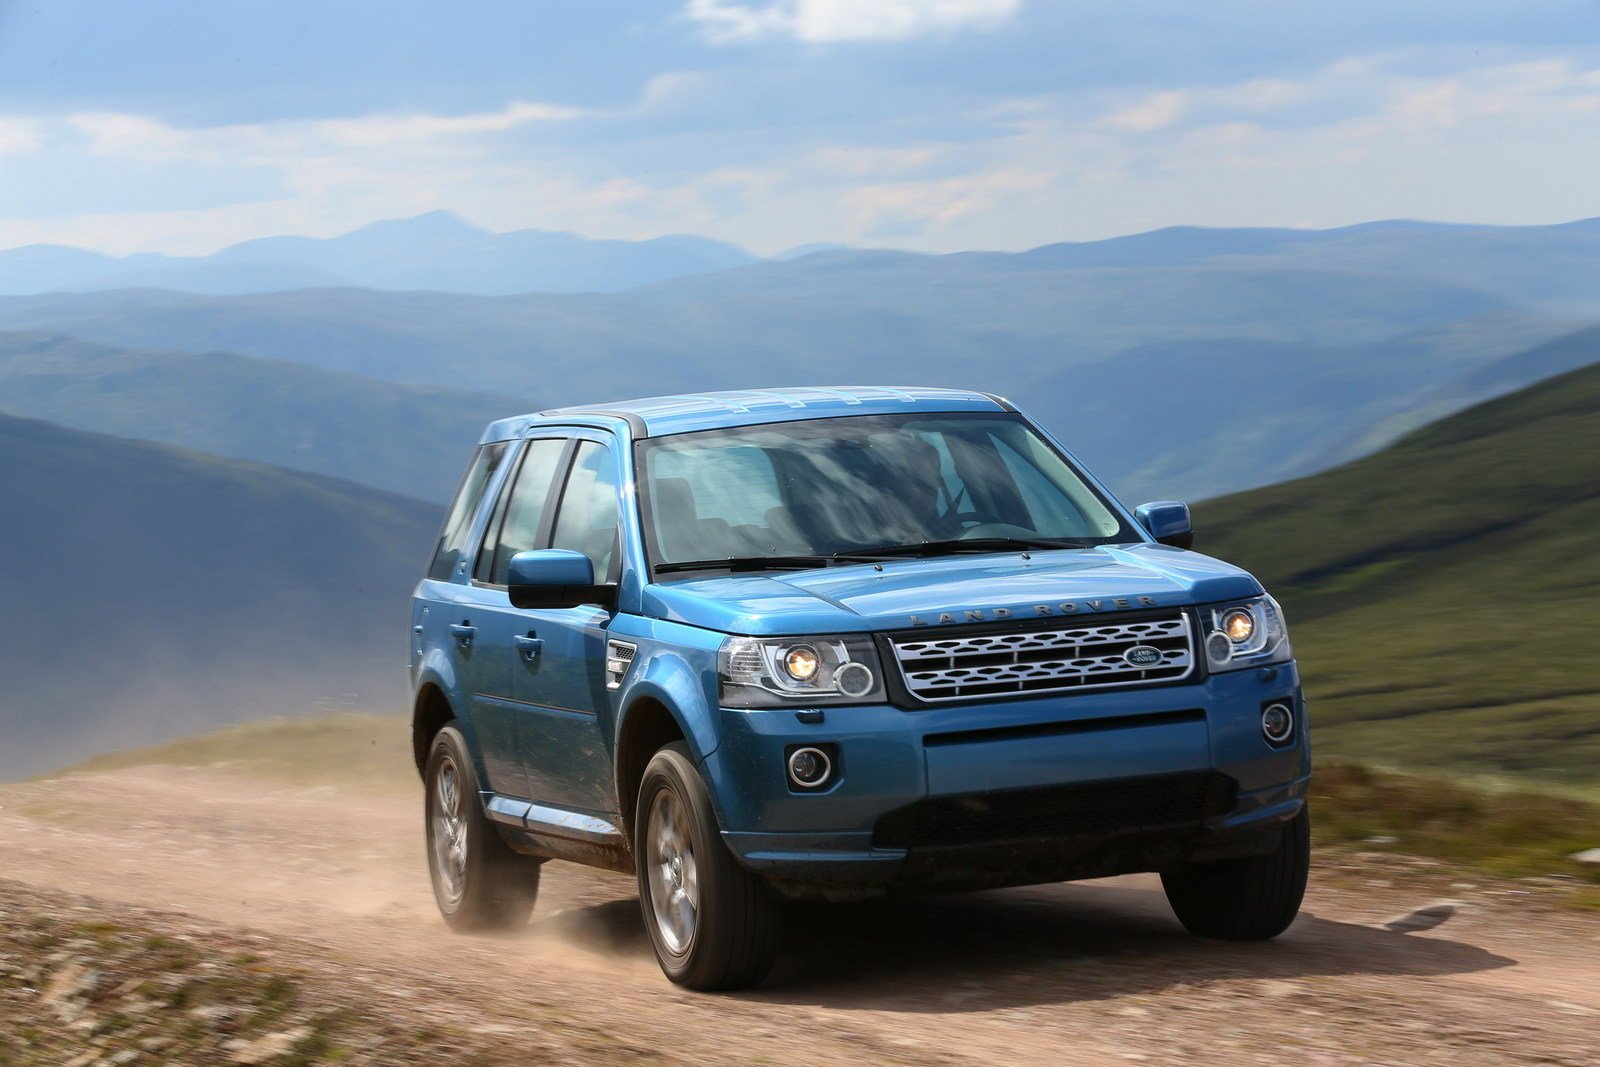 Land-Rover-Freelander-2-2013-Water-in-Fuel-Detection-Reset-by-Launch-X431-1